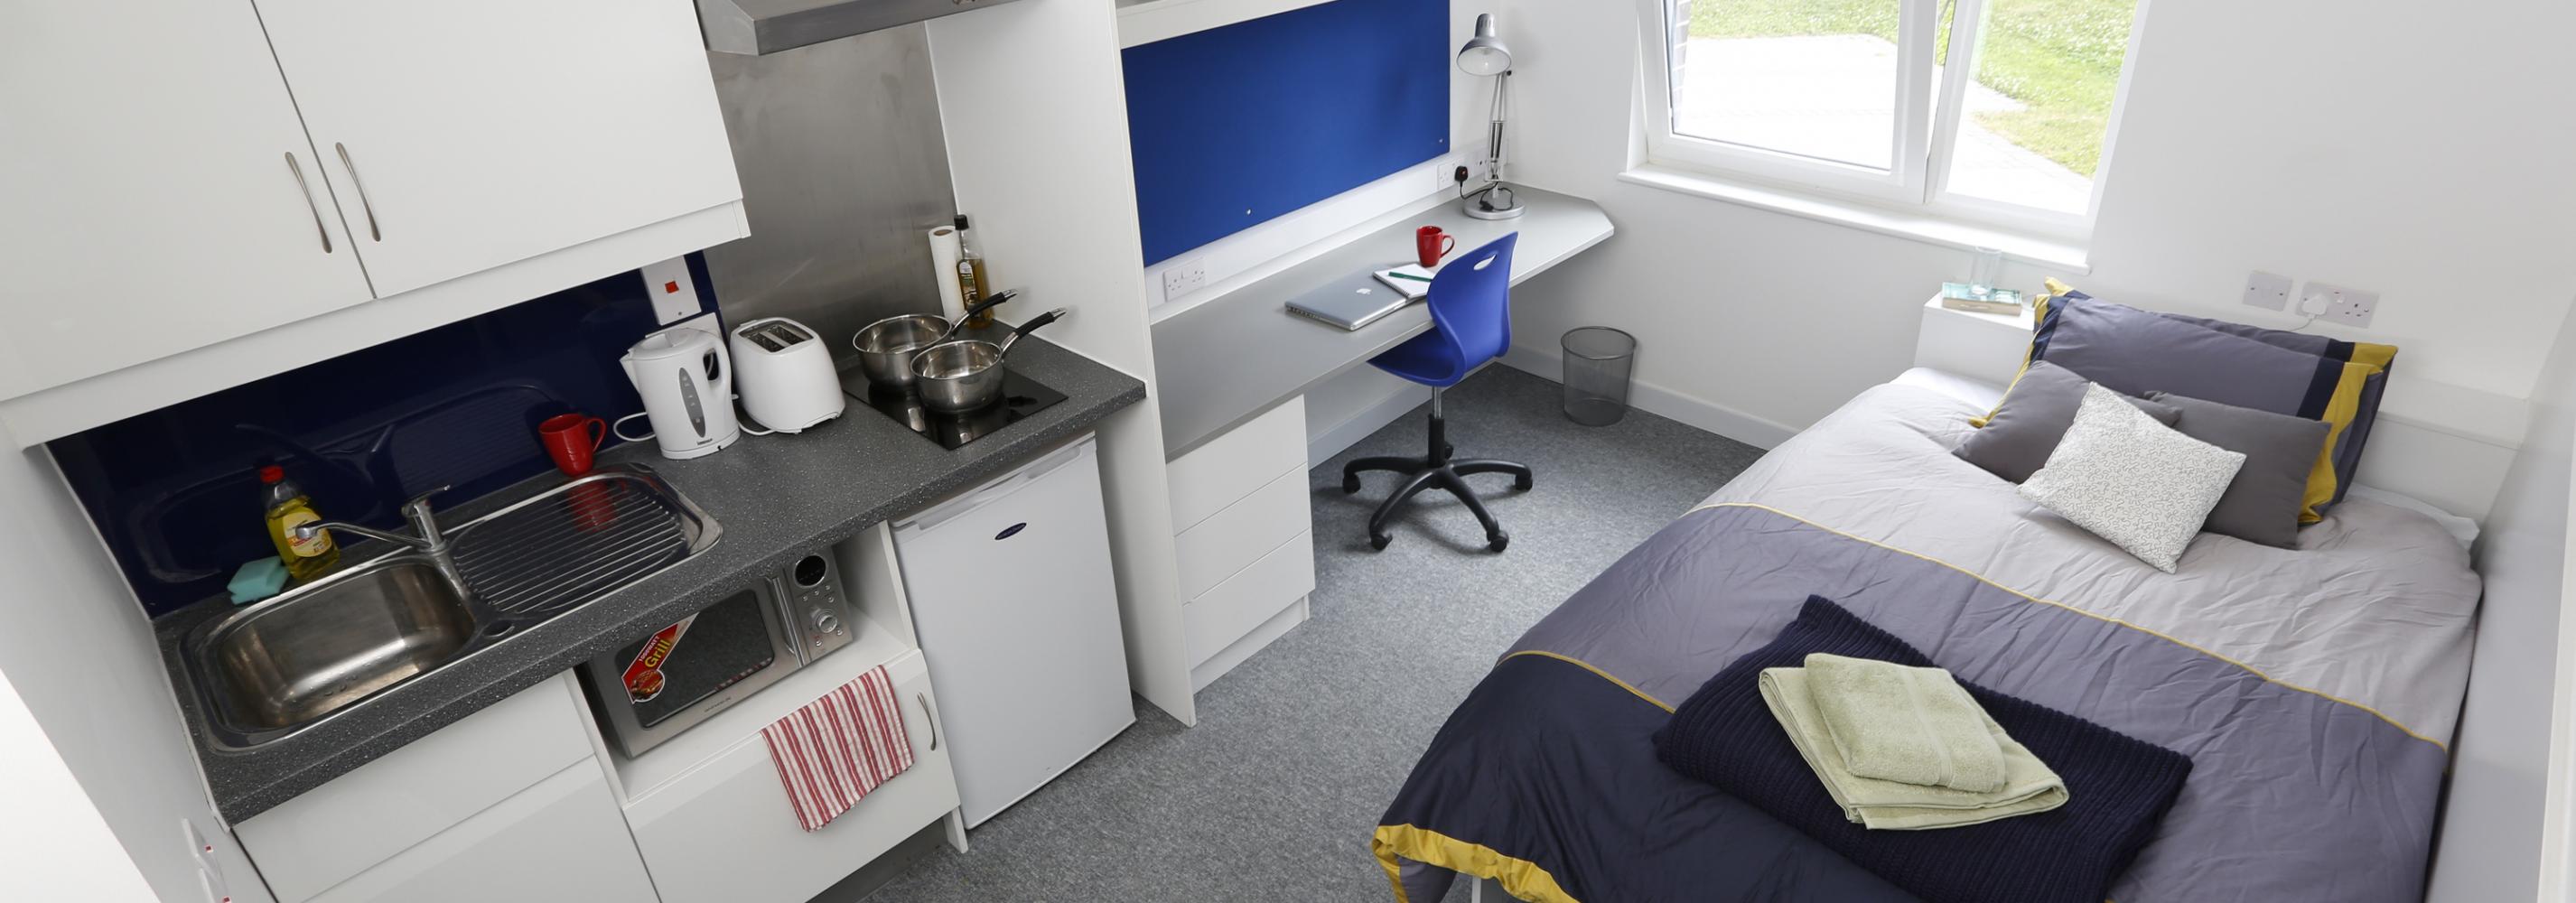 Interior shot of a studio flat, with a small double bed, work/study area, ensuite bathroom and kitchen area